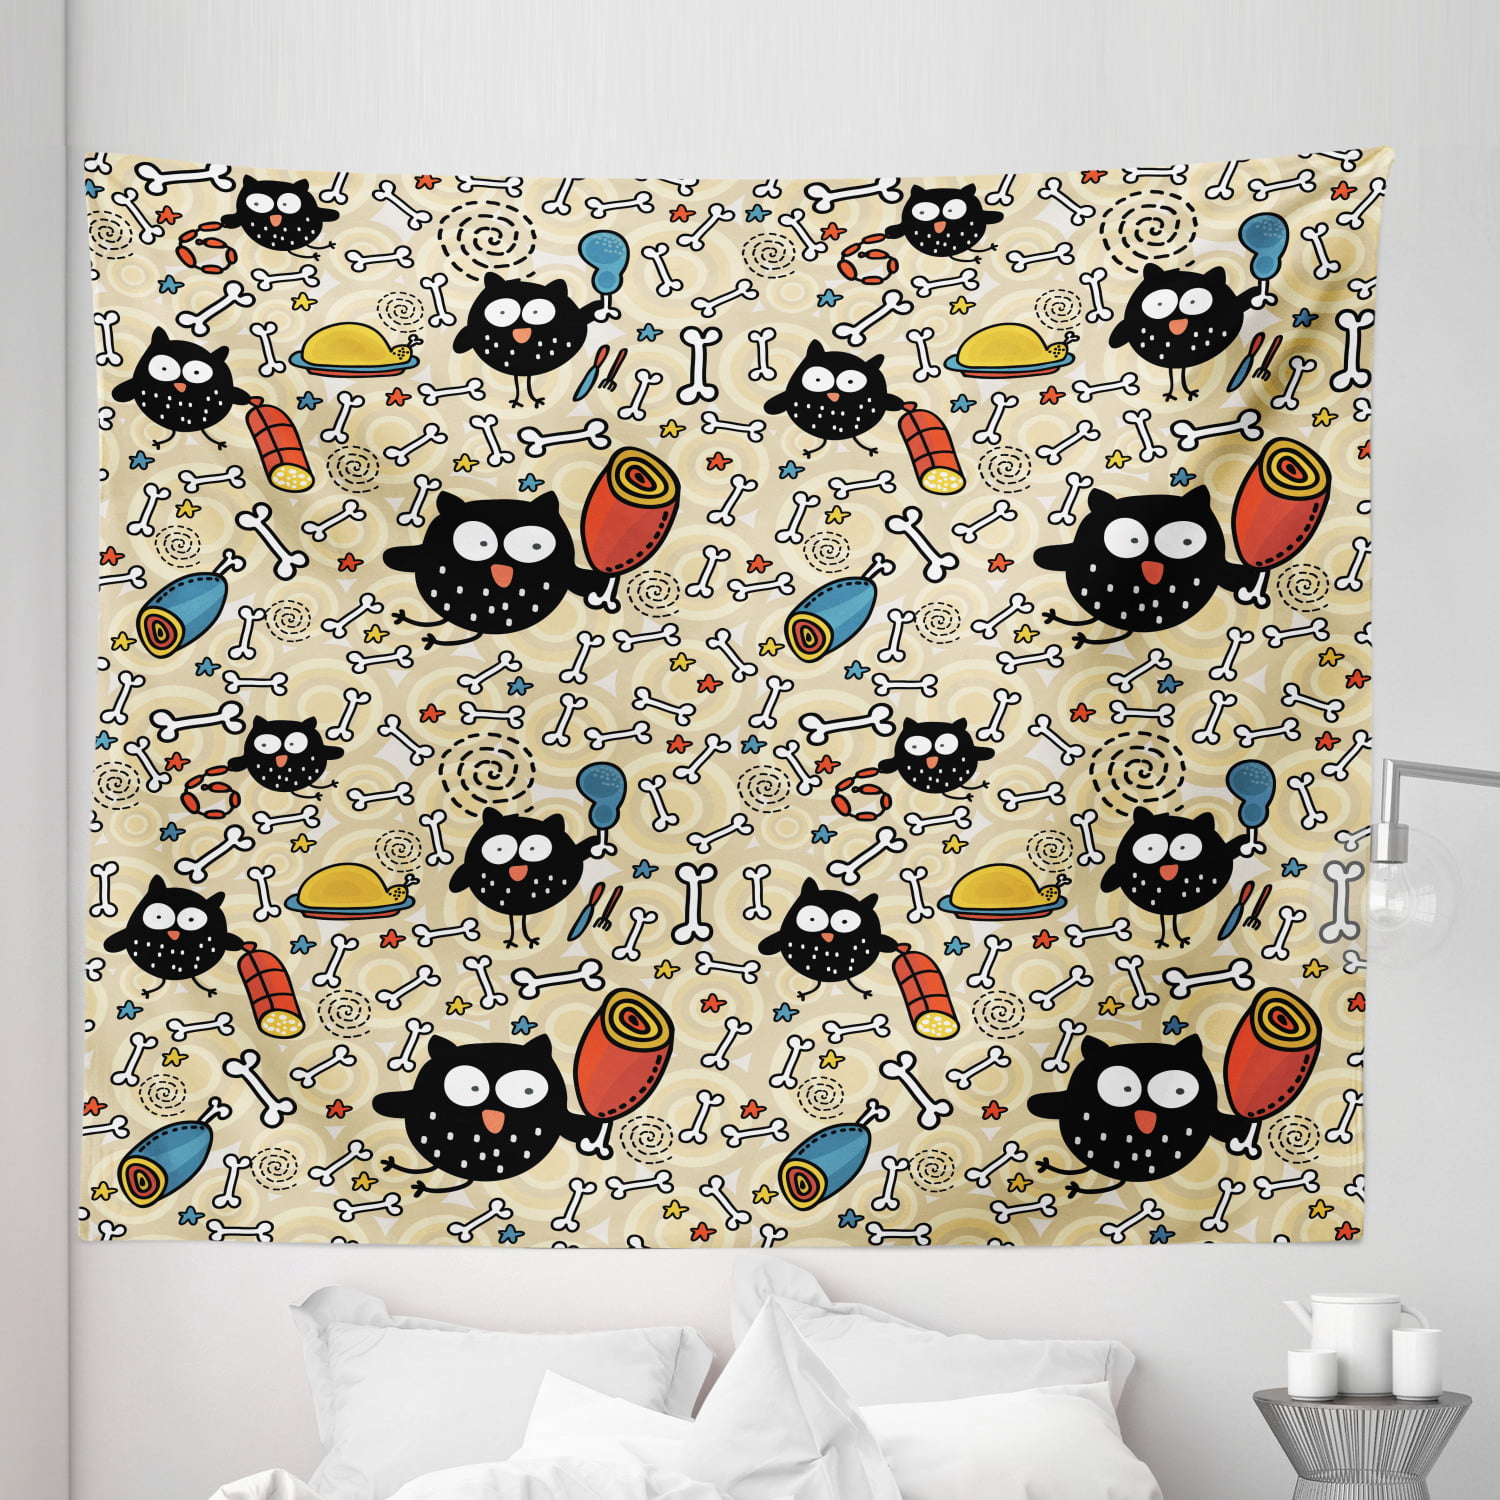 Cartoon Tapestry, Hungry Owls Lots of Bones and Chunks of Meat Eating  Drawing Sketch, Fabric Wall Hanging Decor for Bedroom Living Room Dorm, 5  Sizes, Black Multicolor, by Ambesonne 